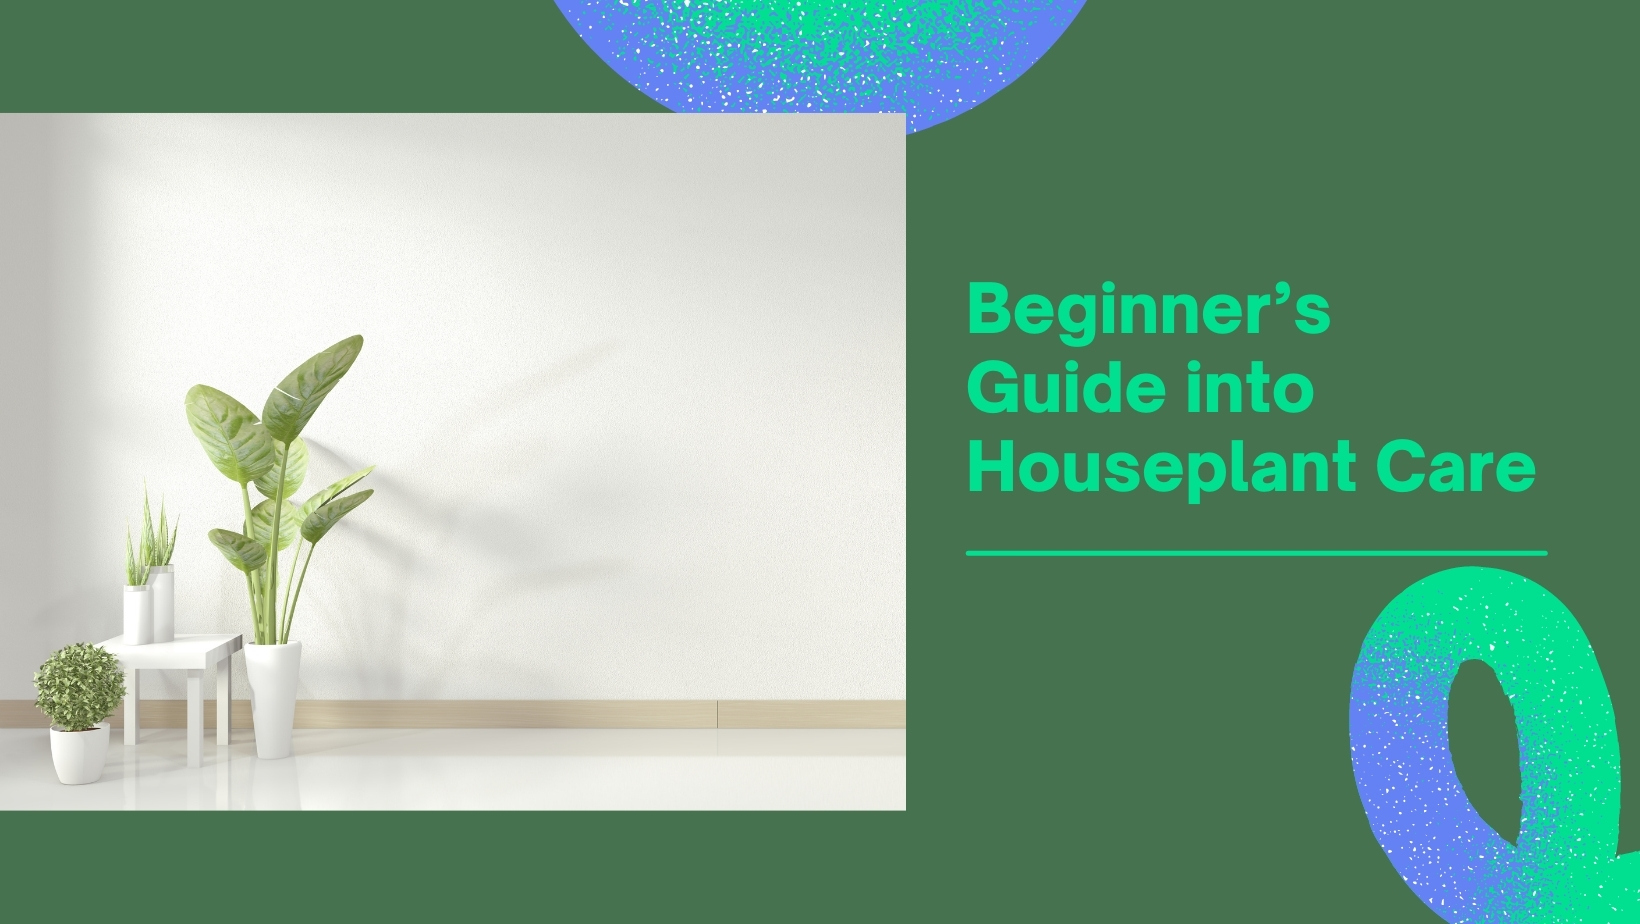 A Beginner’s Guide into Houseplant Care